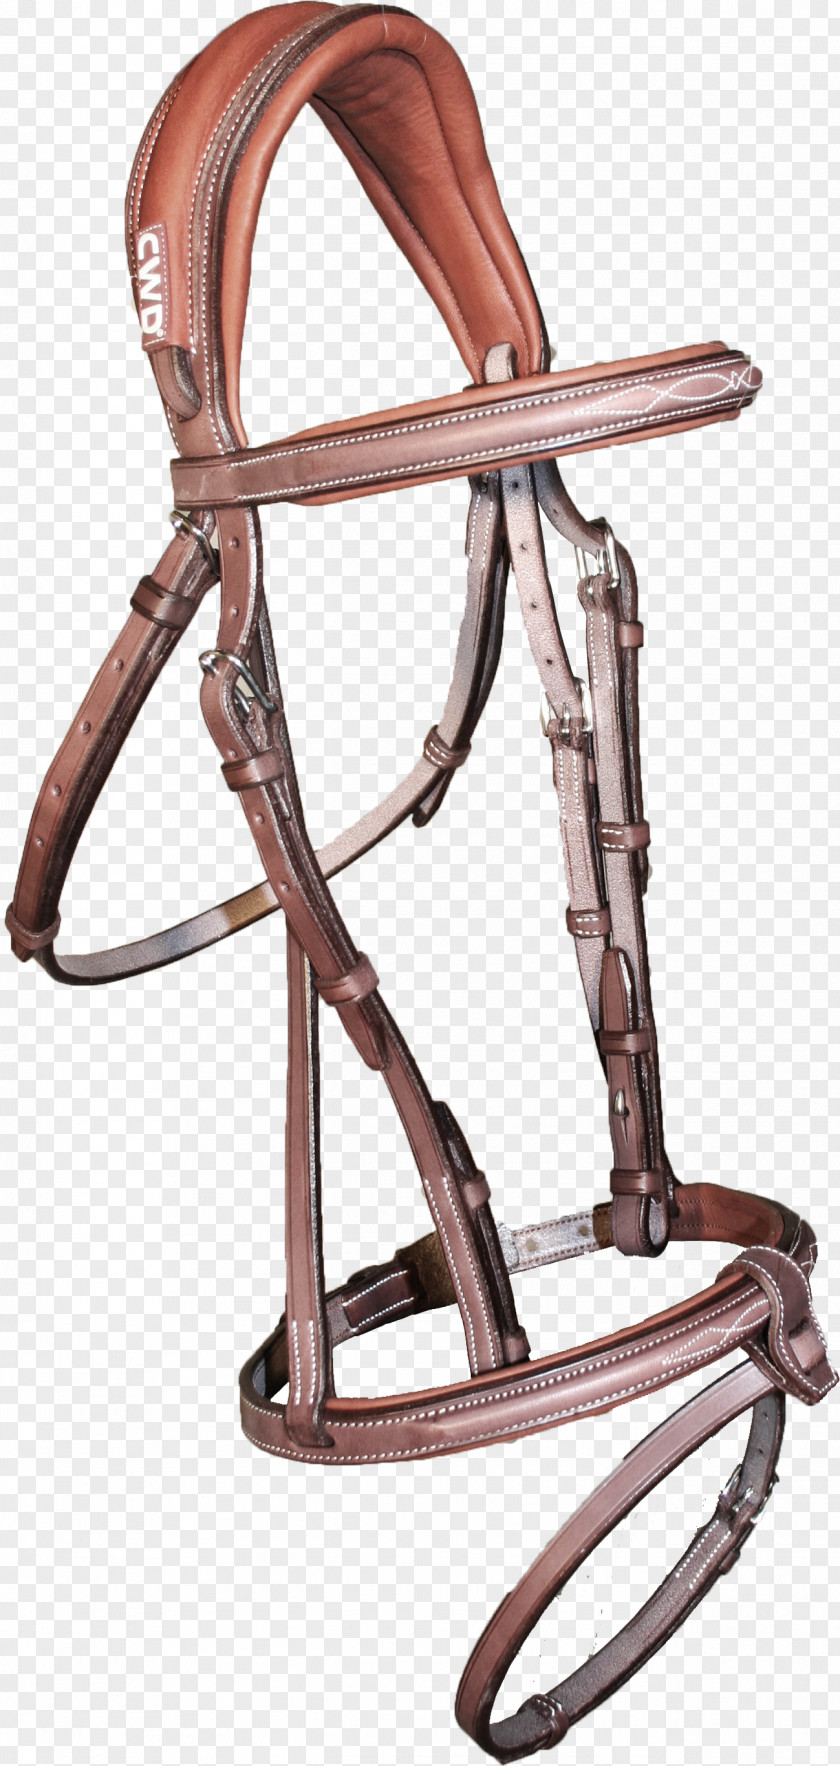 Bridle Leather Anatomy Tanning PNG